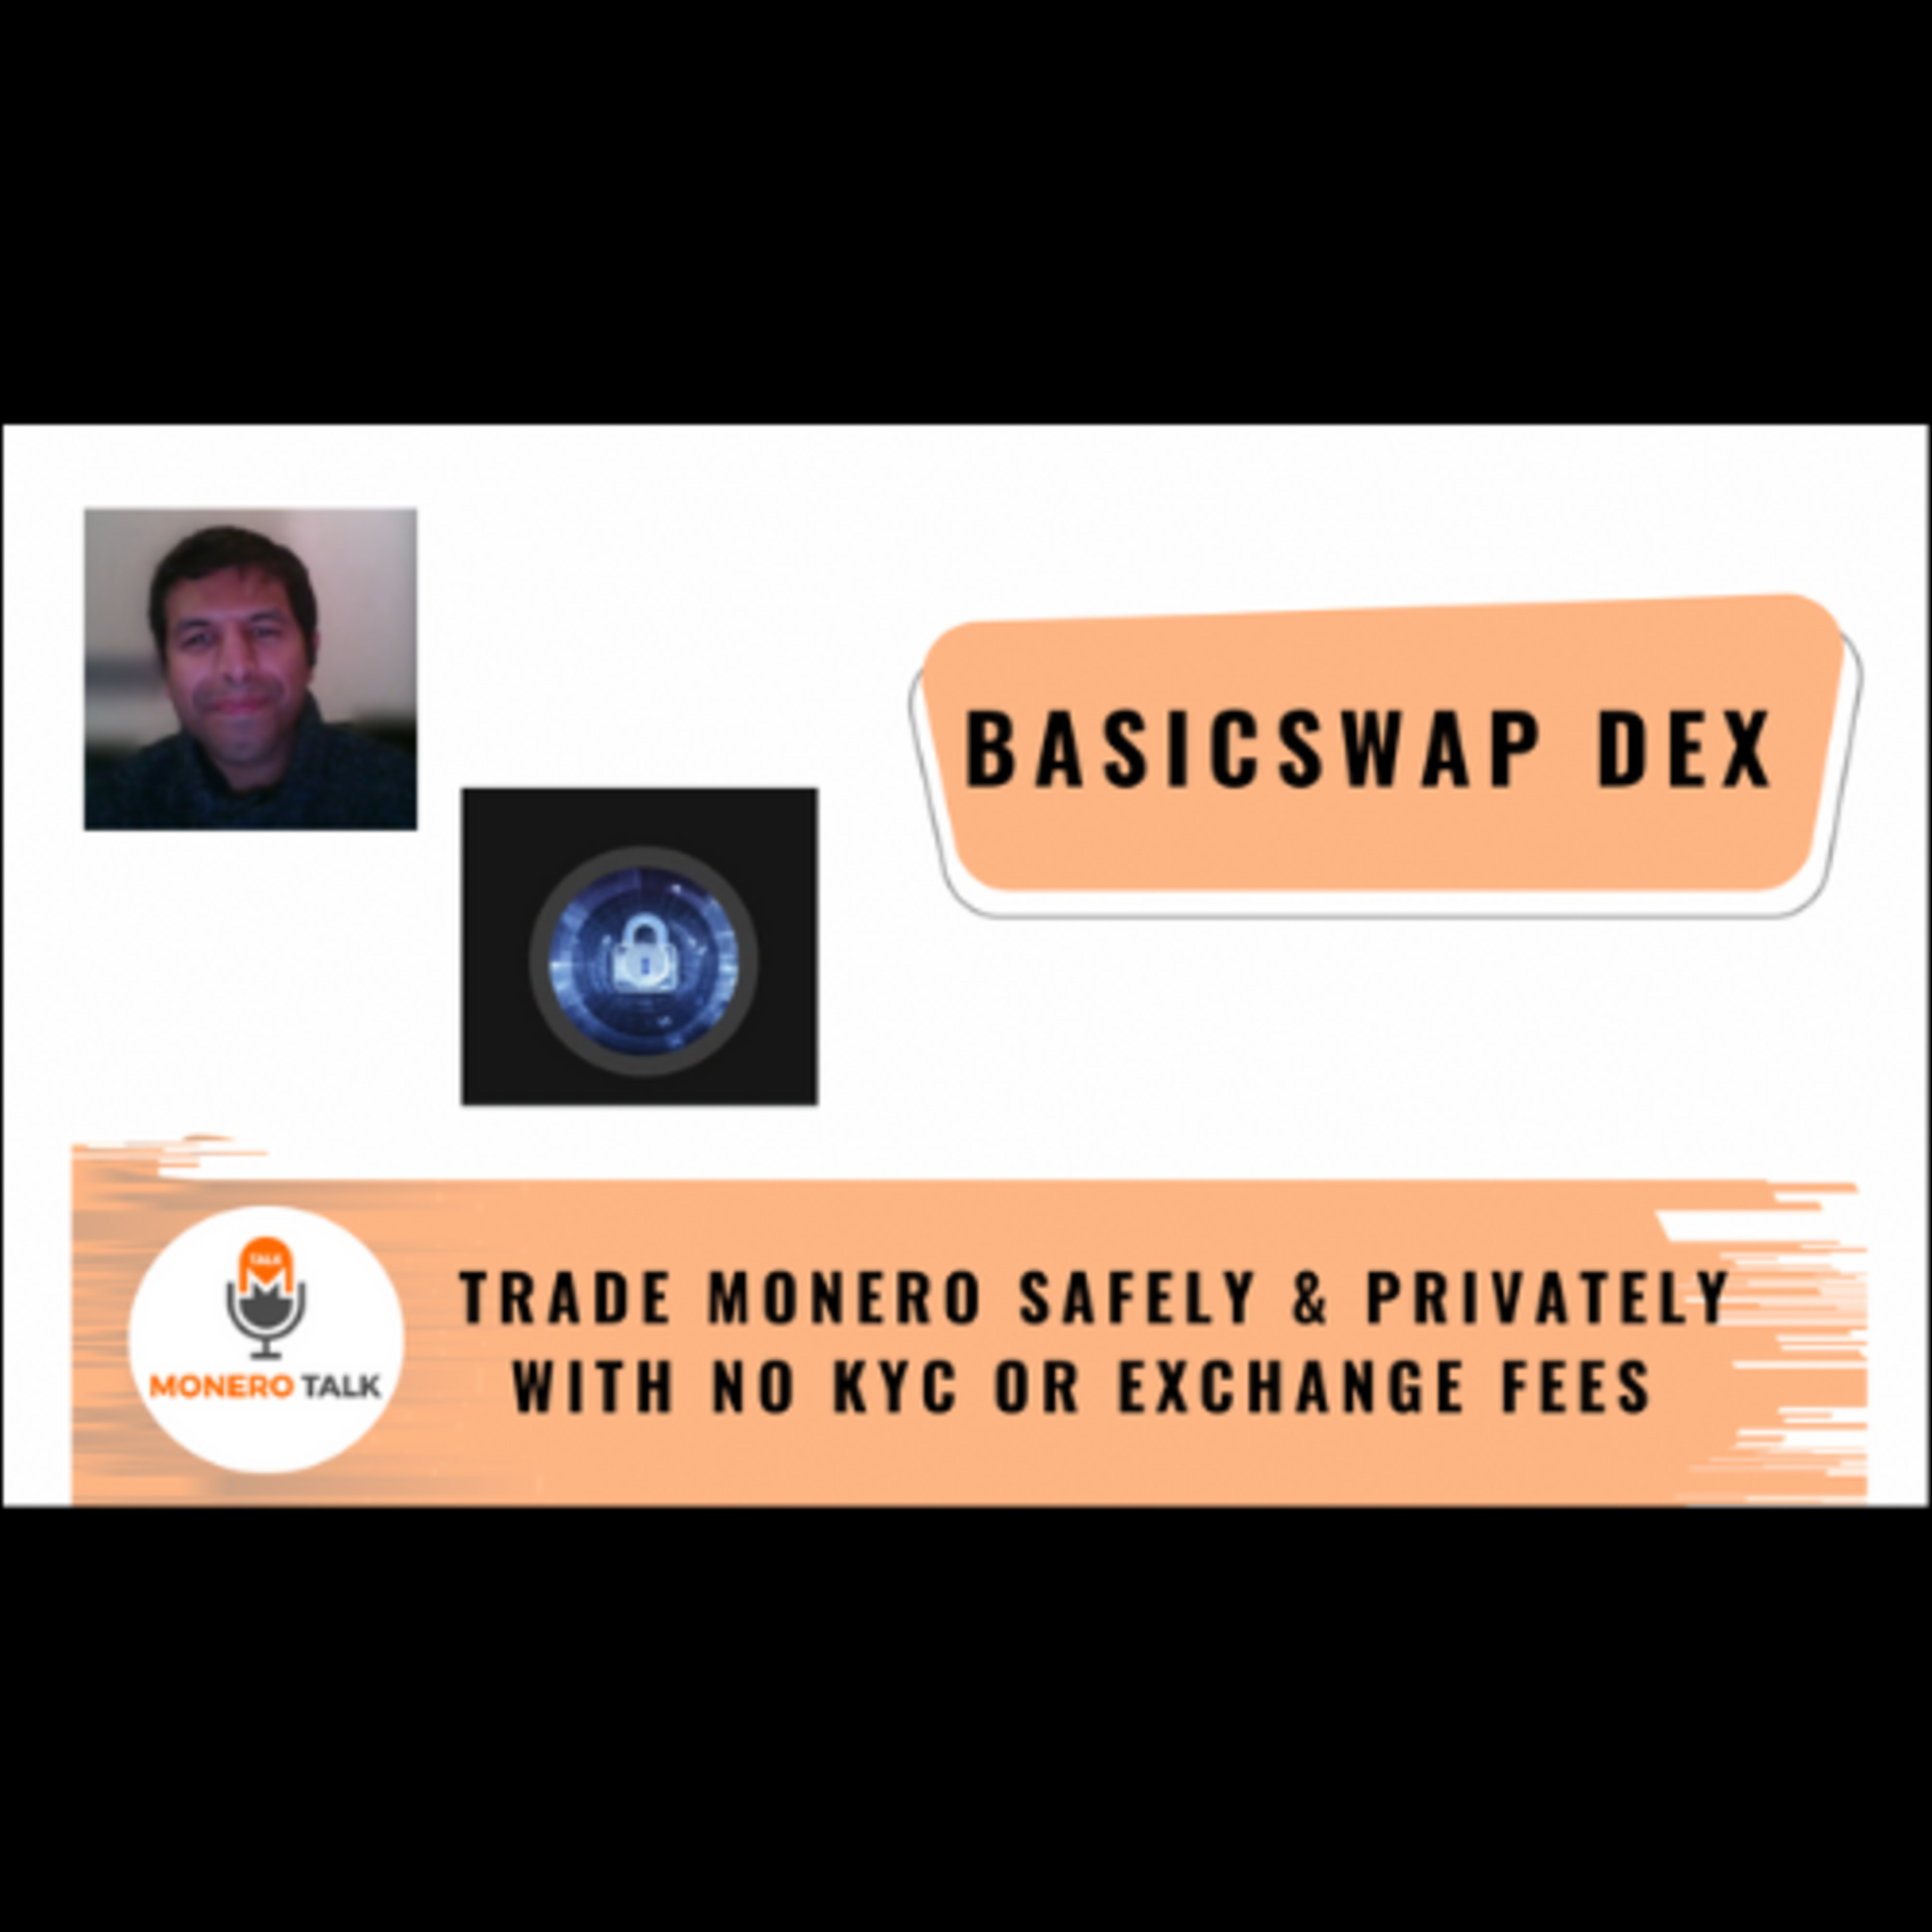 BasicSwapDex — trade Monero safely and privately with no KYC or exchange fees